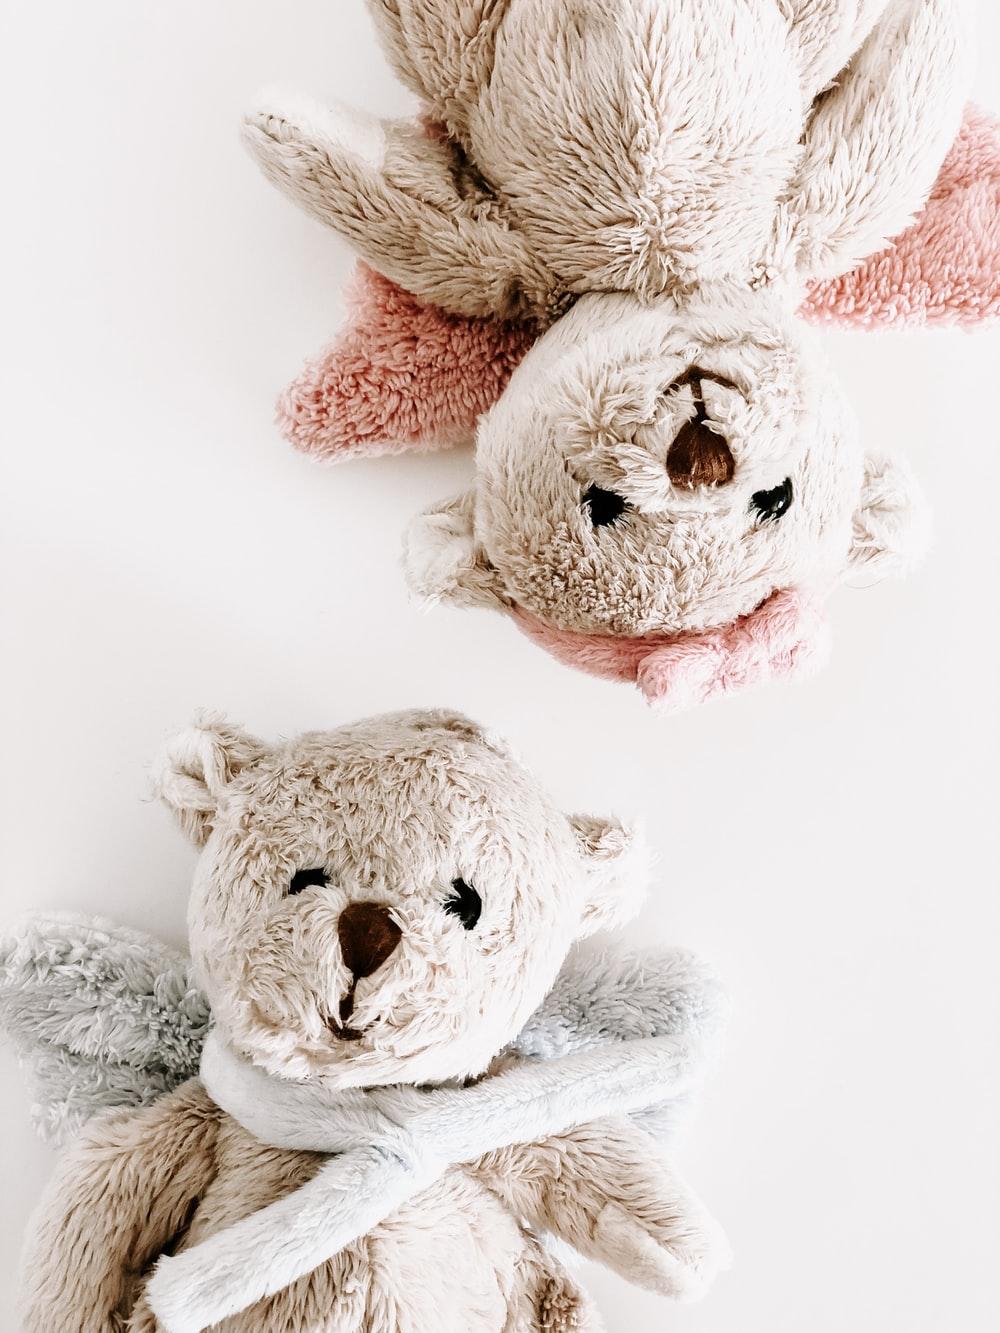 Teddy Picture. Download Free Image